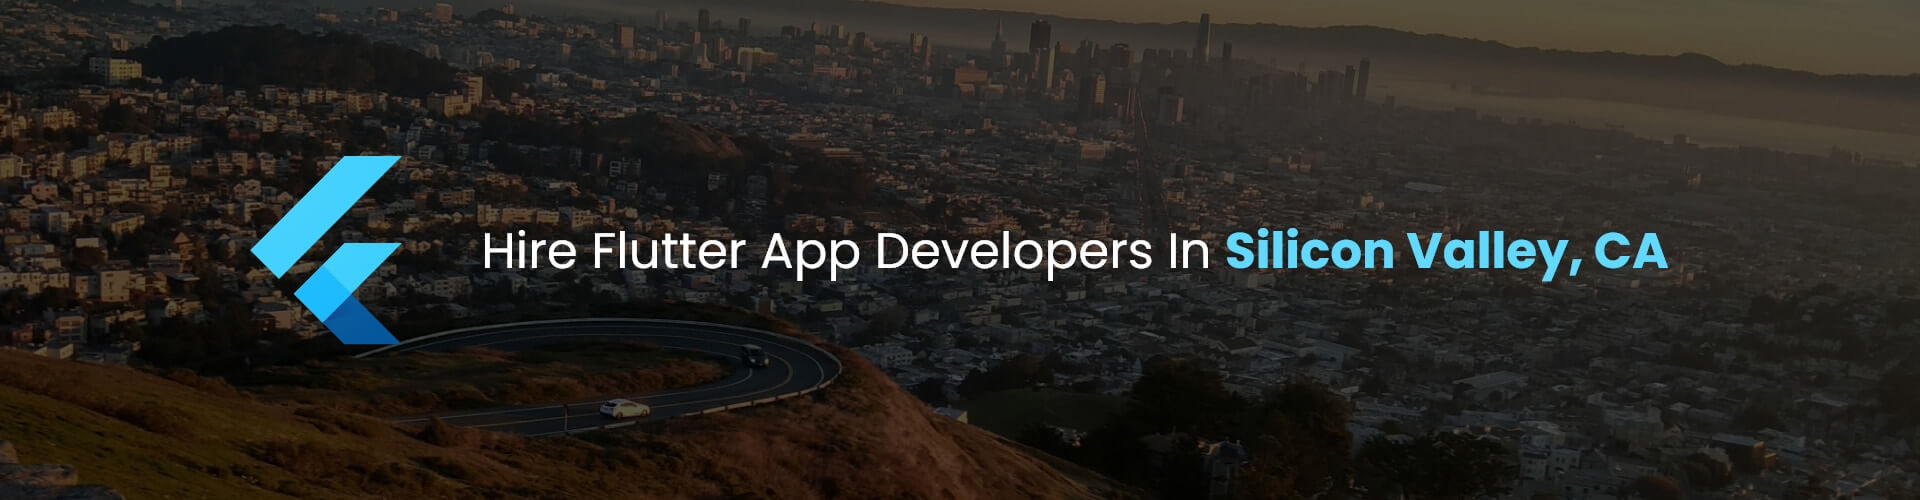 flutter app developers in silicon valley